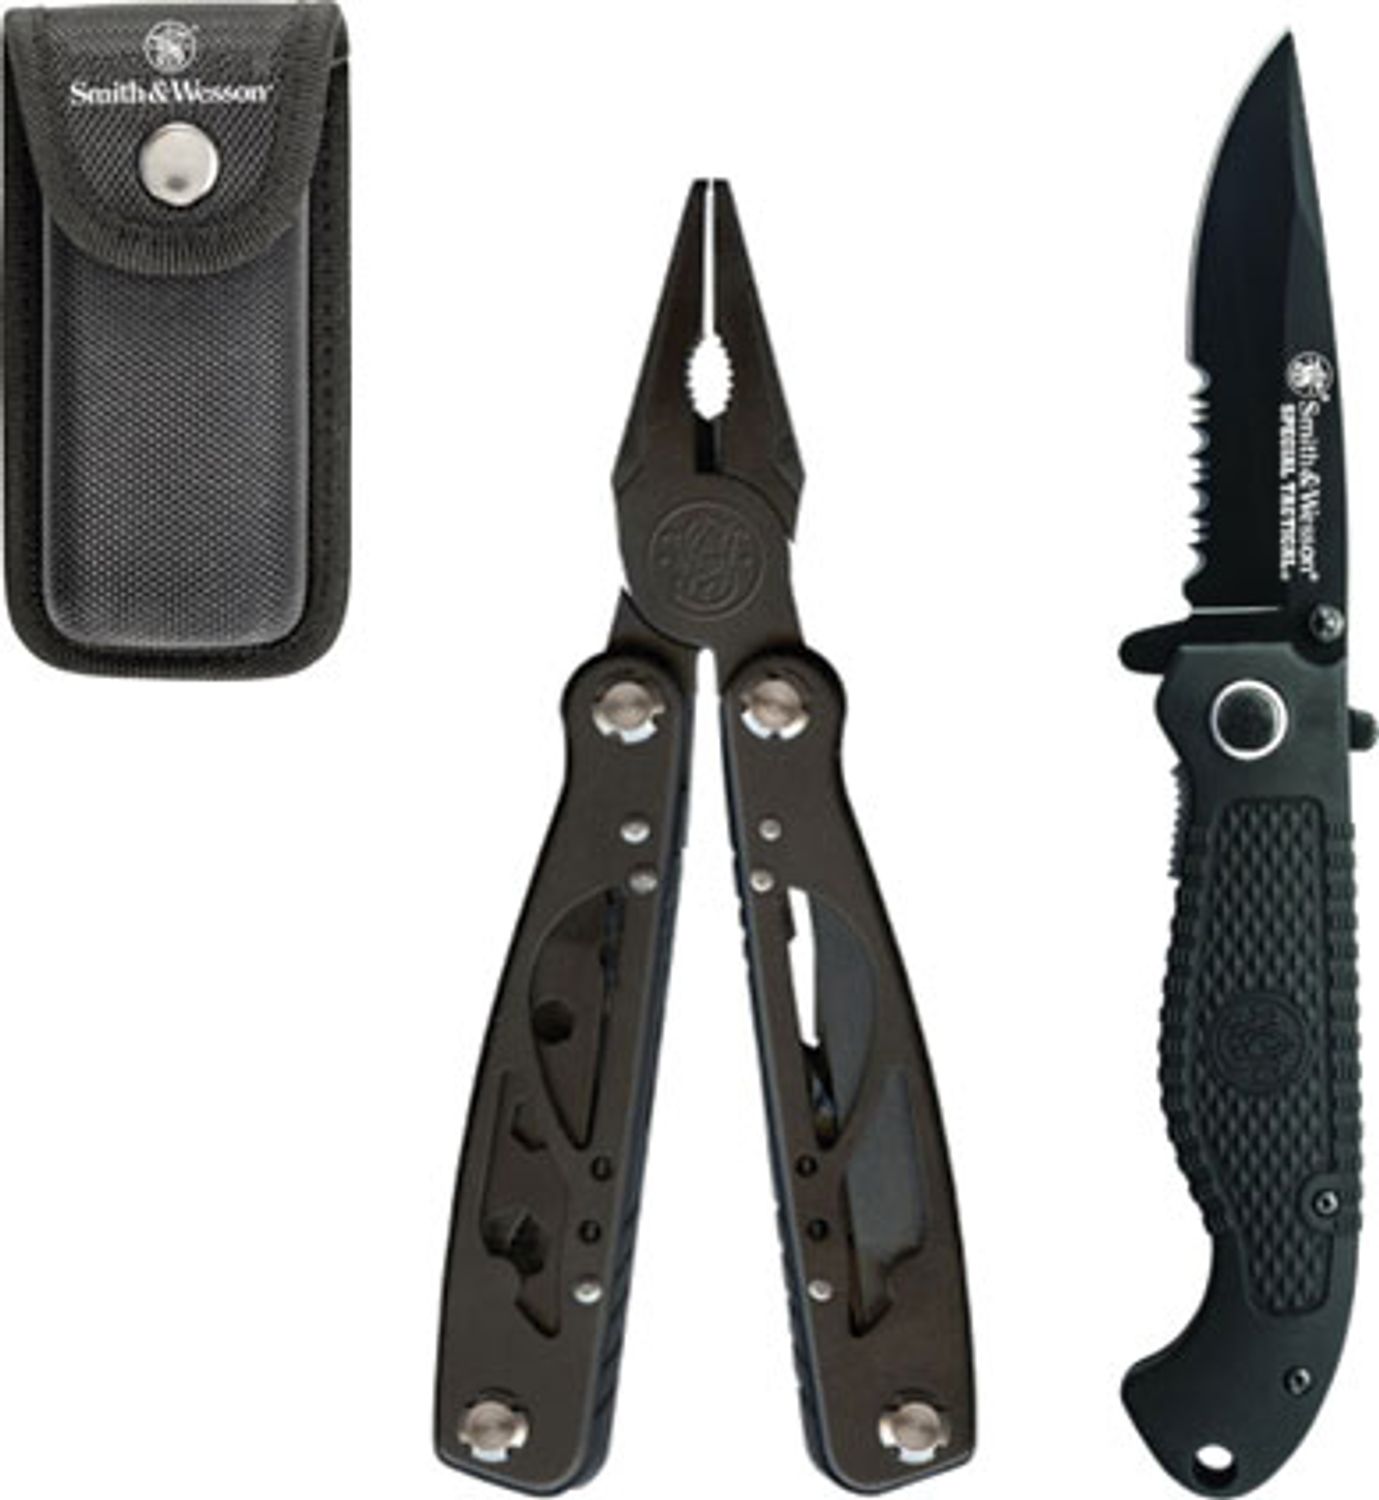 How to Choose Knives & Multi-Tools